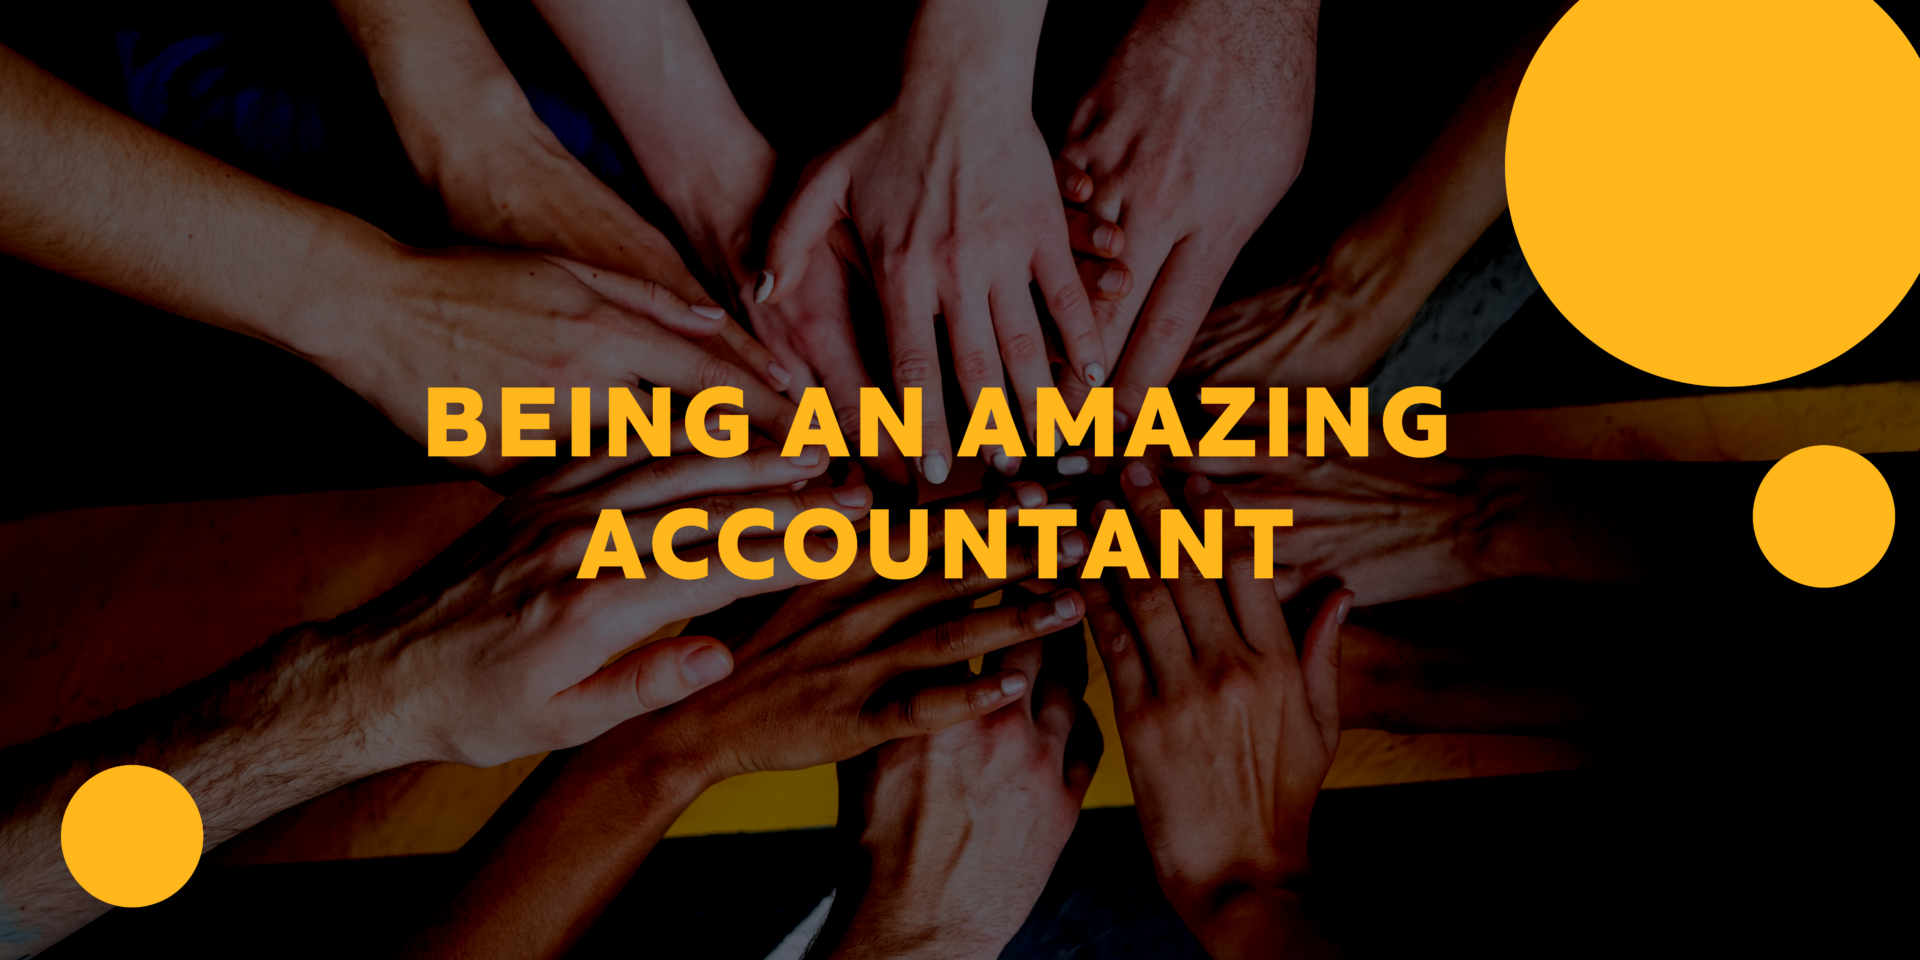 Being an amazing Accountant